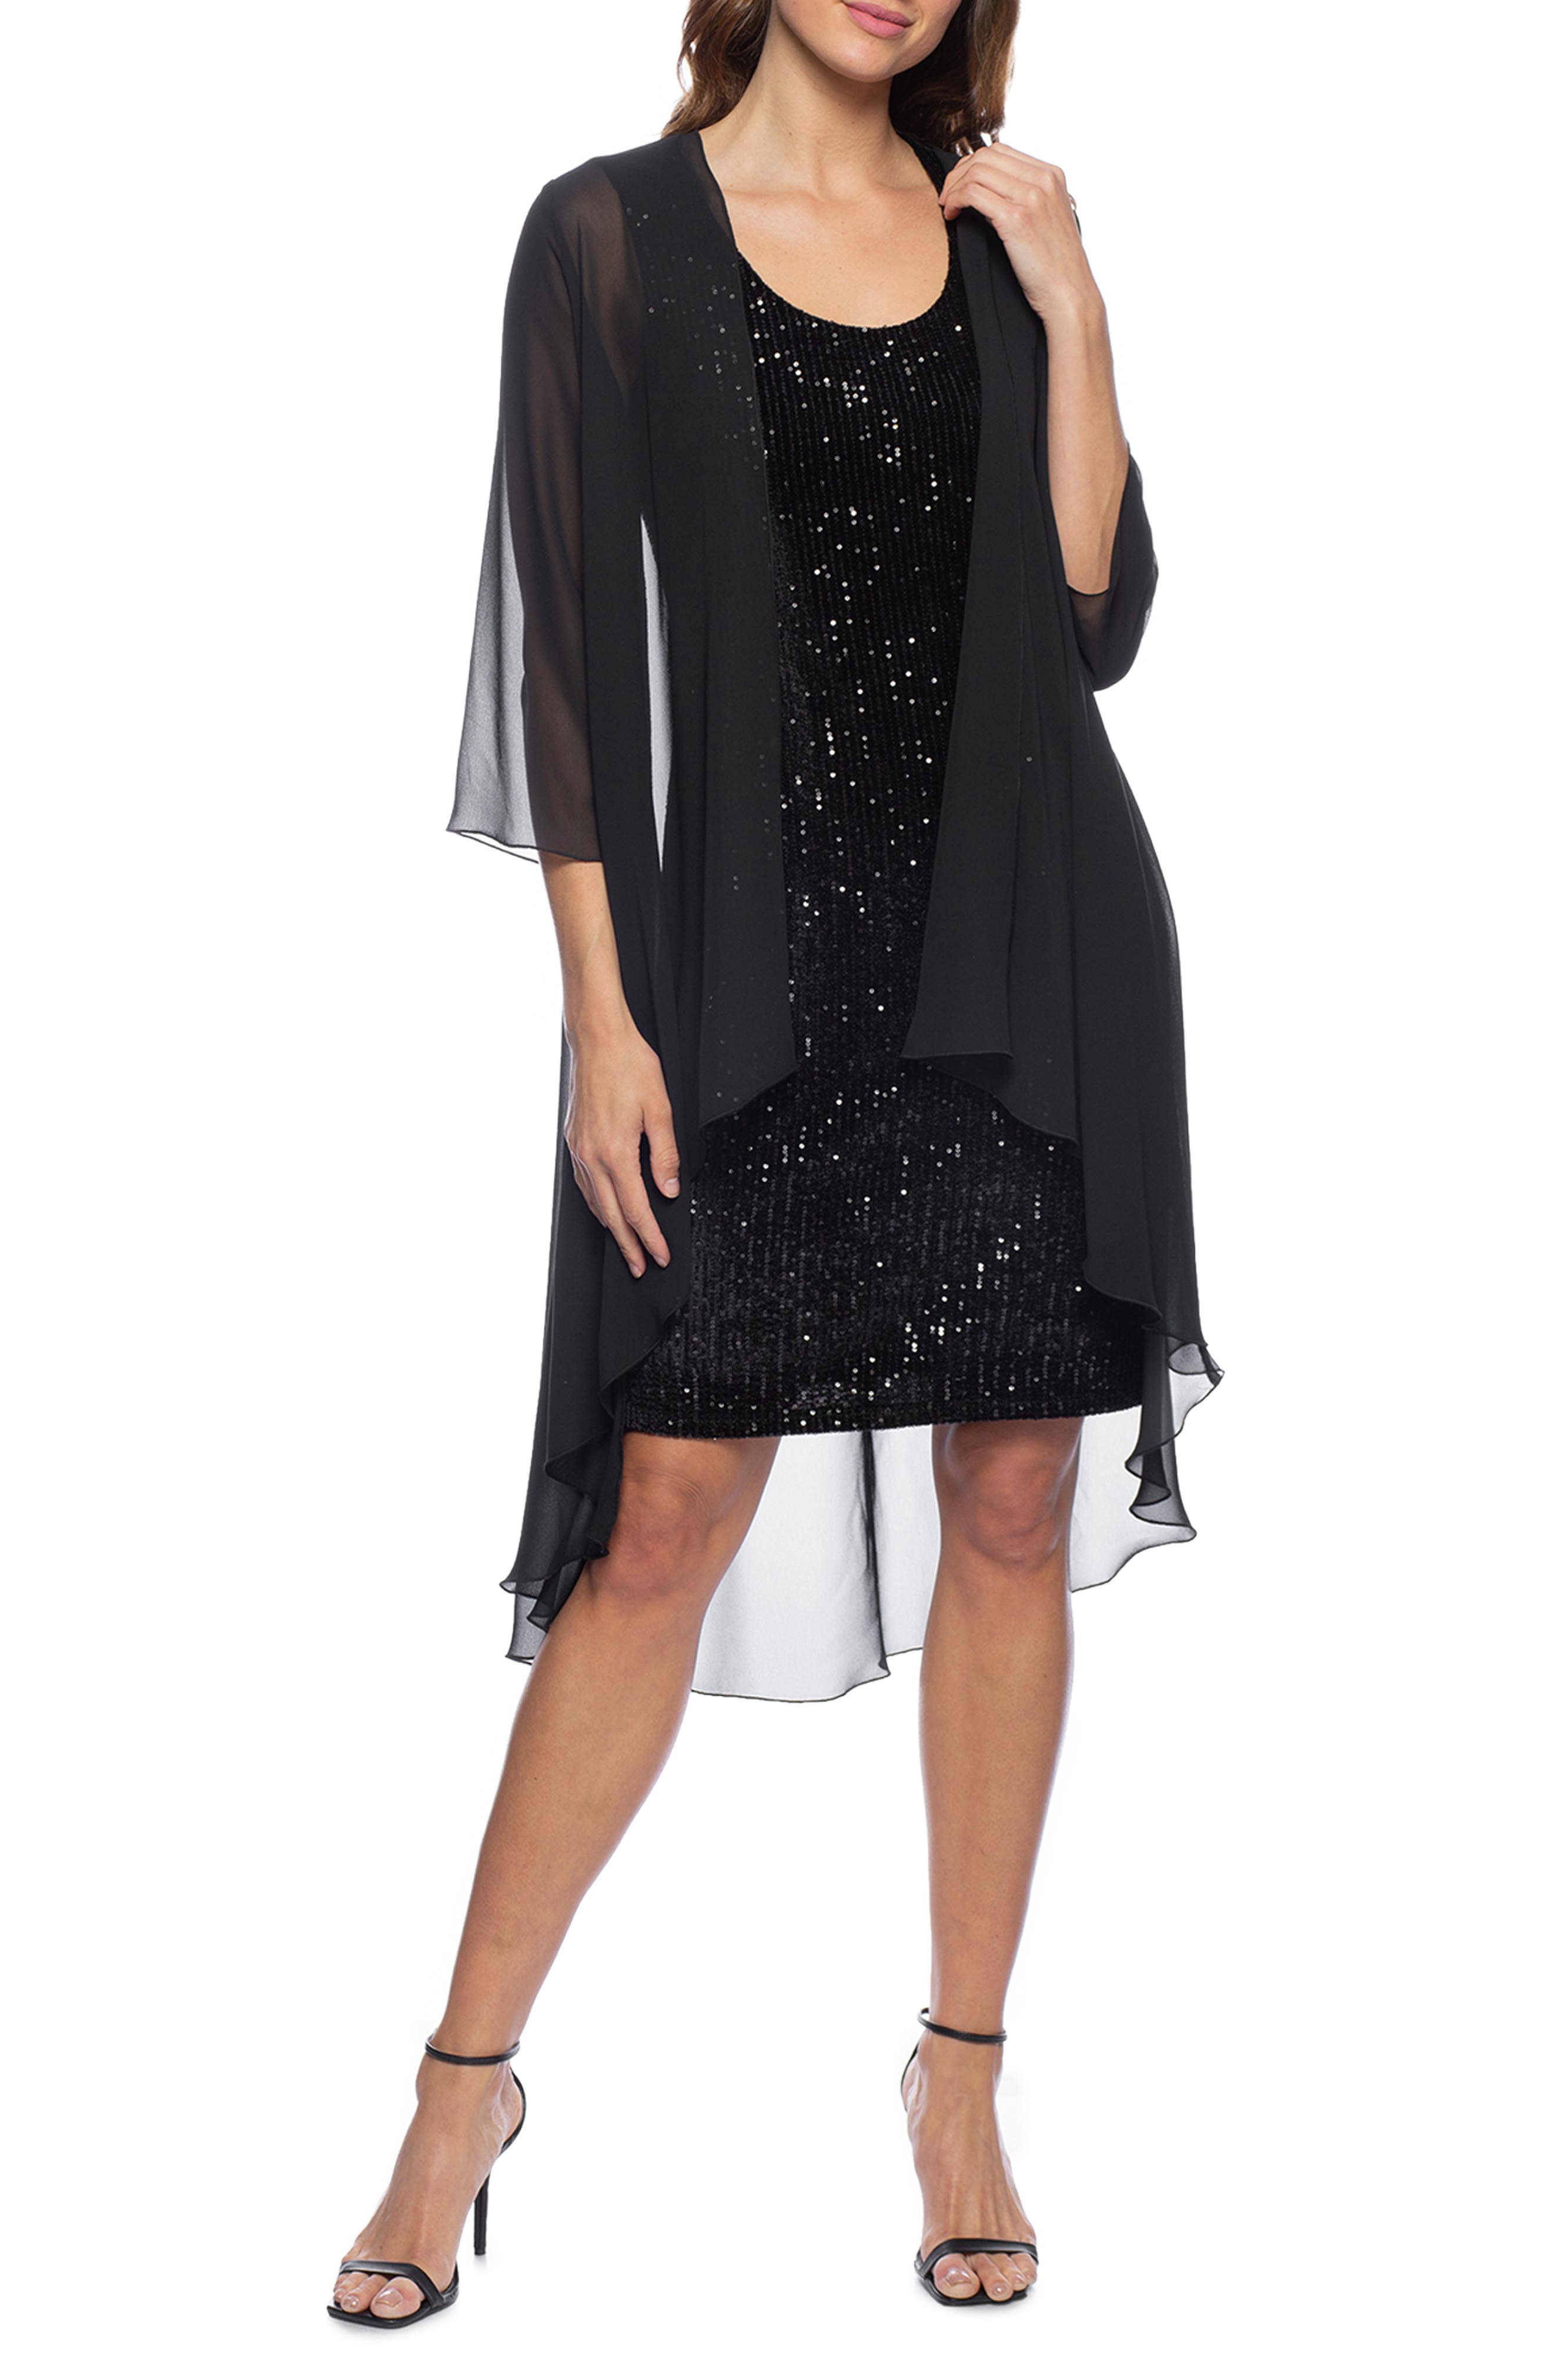 Great Gatsby Dress – Great Gatsby Dresses for Sale Marina Sequined Velvet Dress with Sheer Shawl in Black at Nordstrom Rack Size X-Large $72.97 AT vintagedancer.com